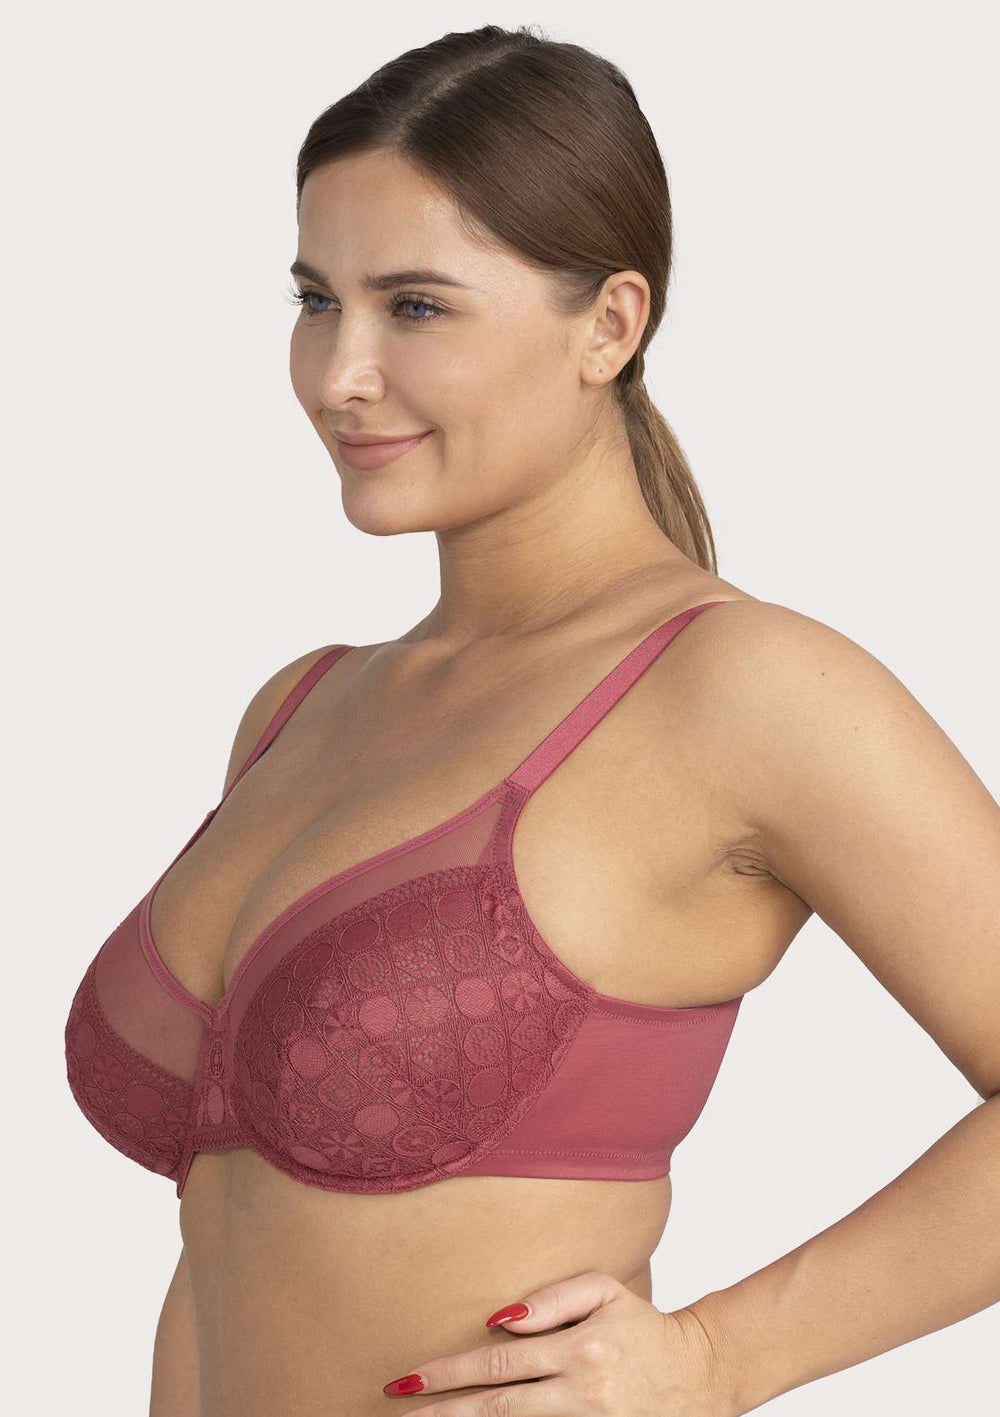 Barely There Bra Style 4280 Sizes C-D Cup NWT LIMITED